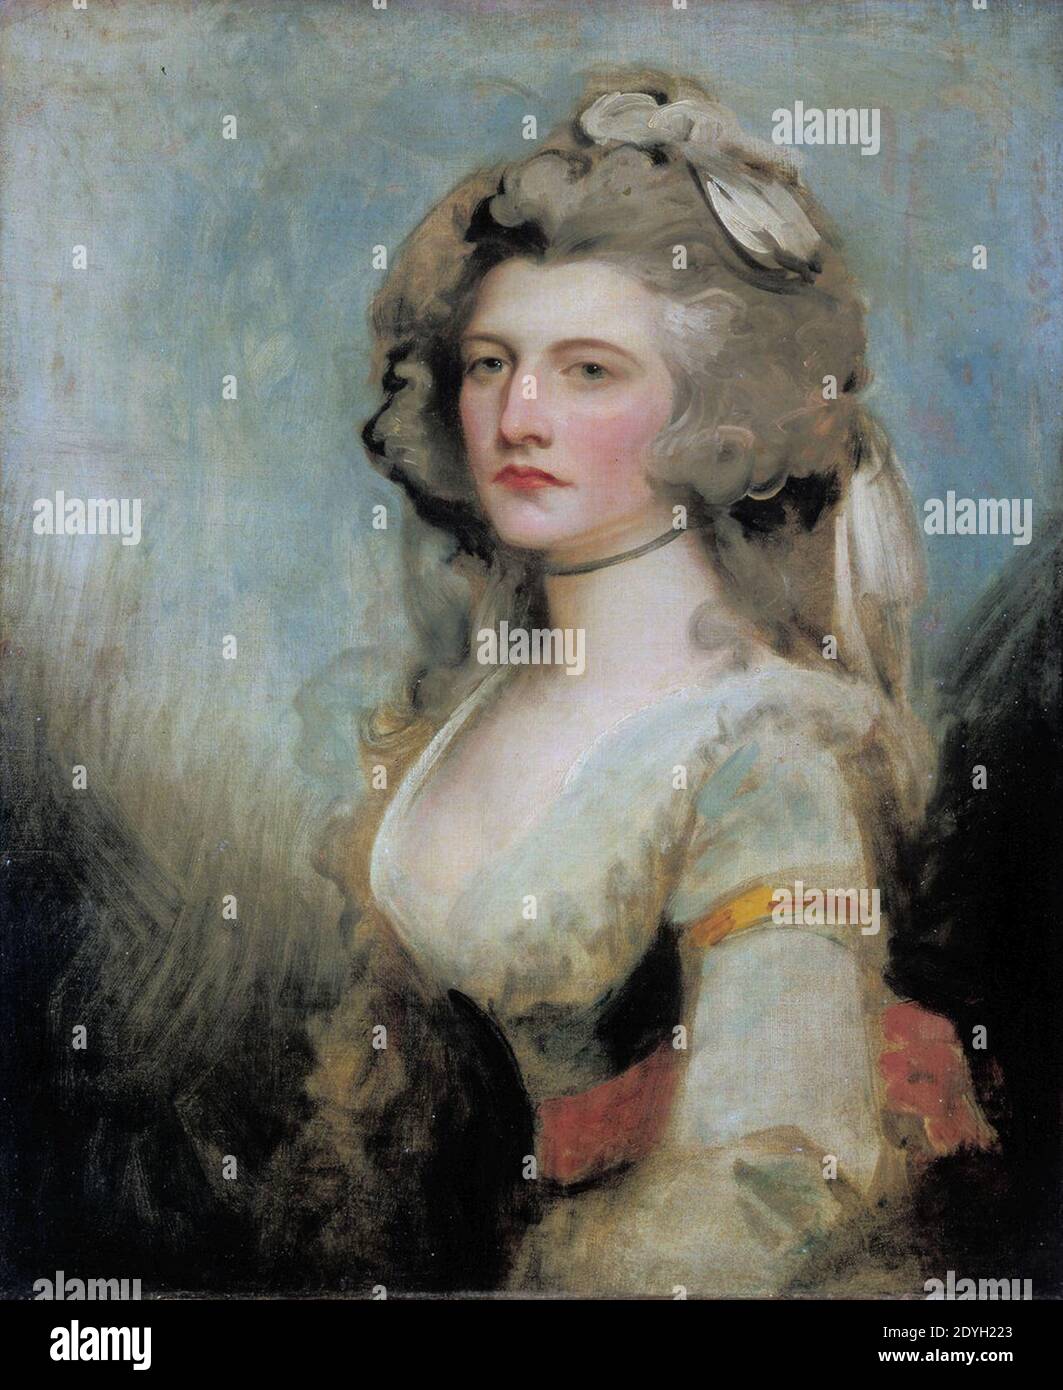 Lady Sarah Curran, by George Romney. Stock Photo